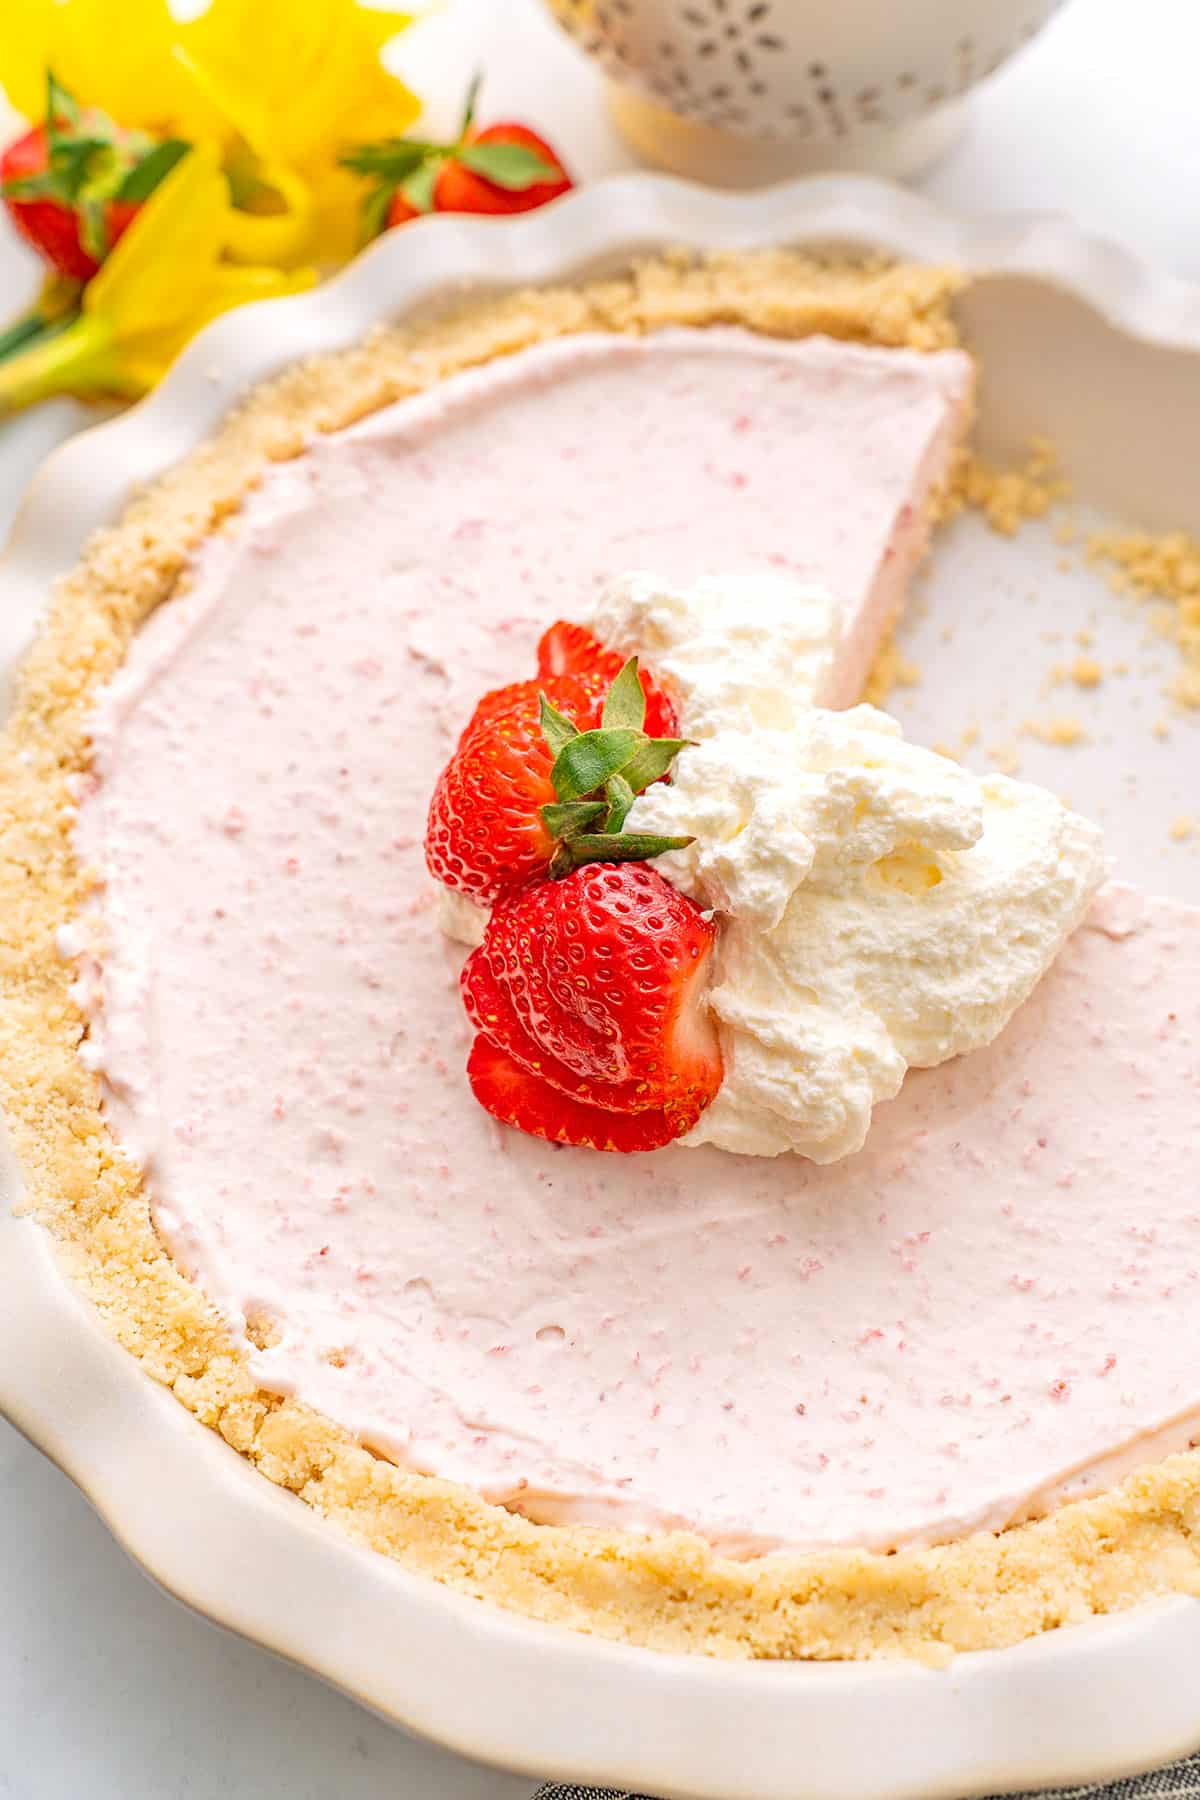 Top down image of Keto Strawberry Cream Pie with a slice cut out of it.